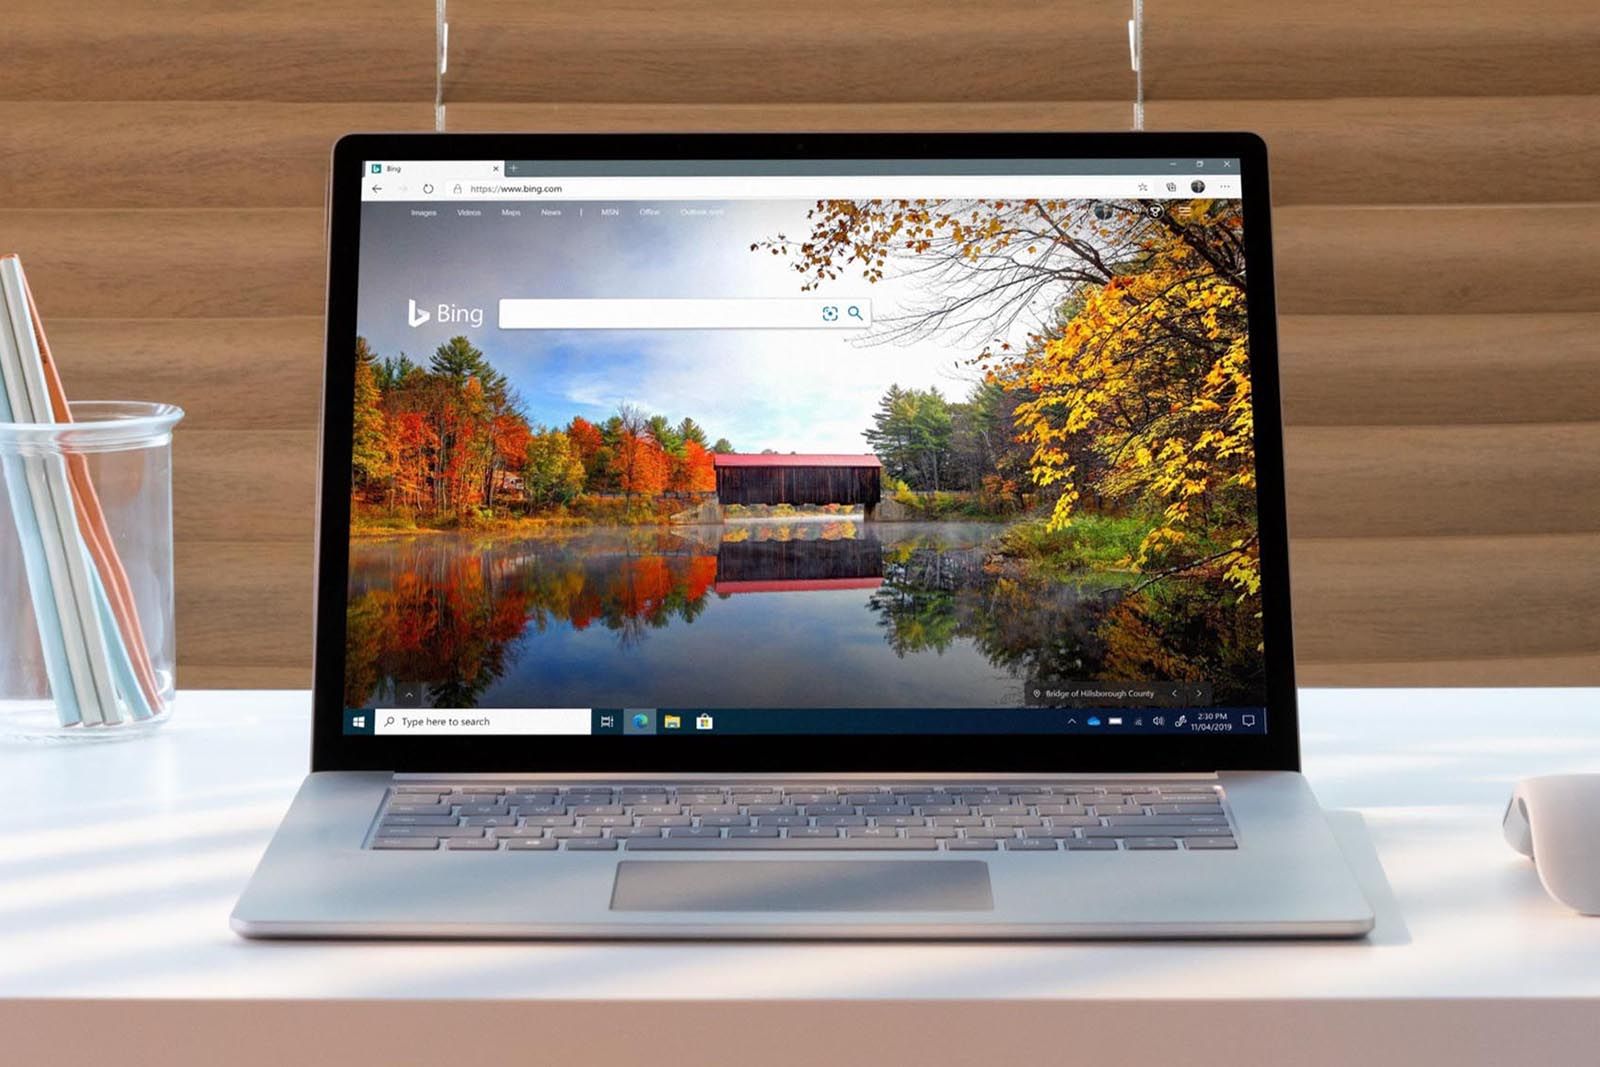 Microsofts Chromium Edge browser full release date revealed image 1